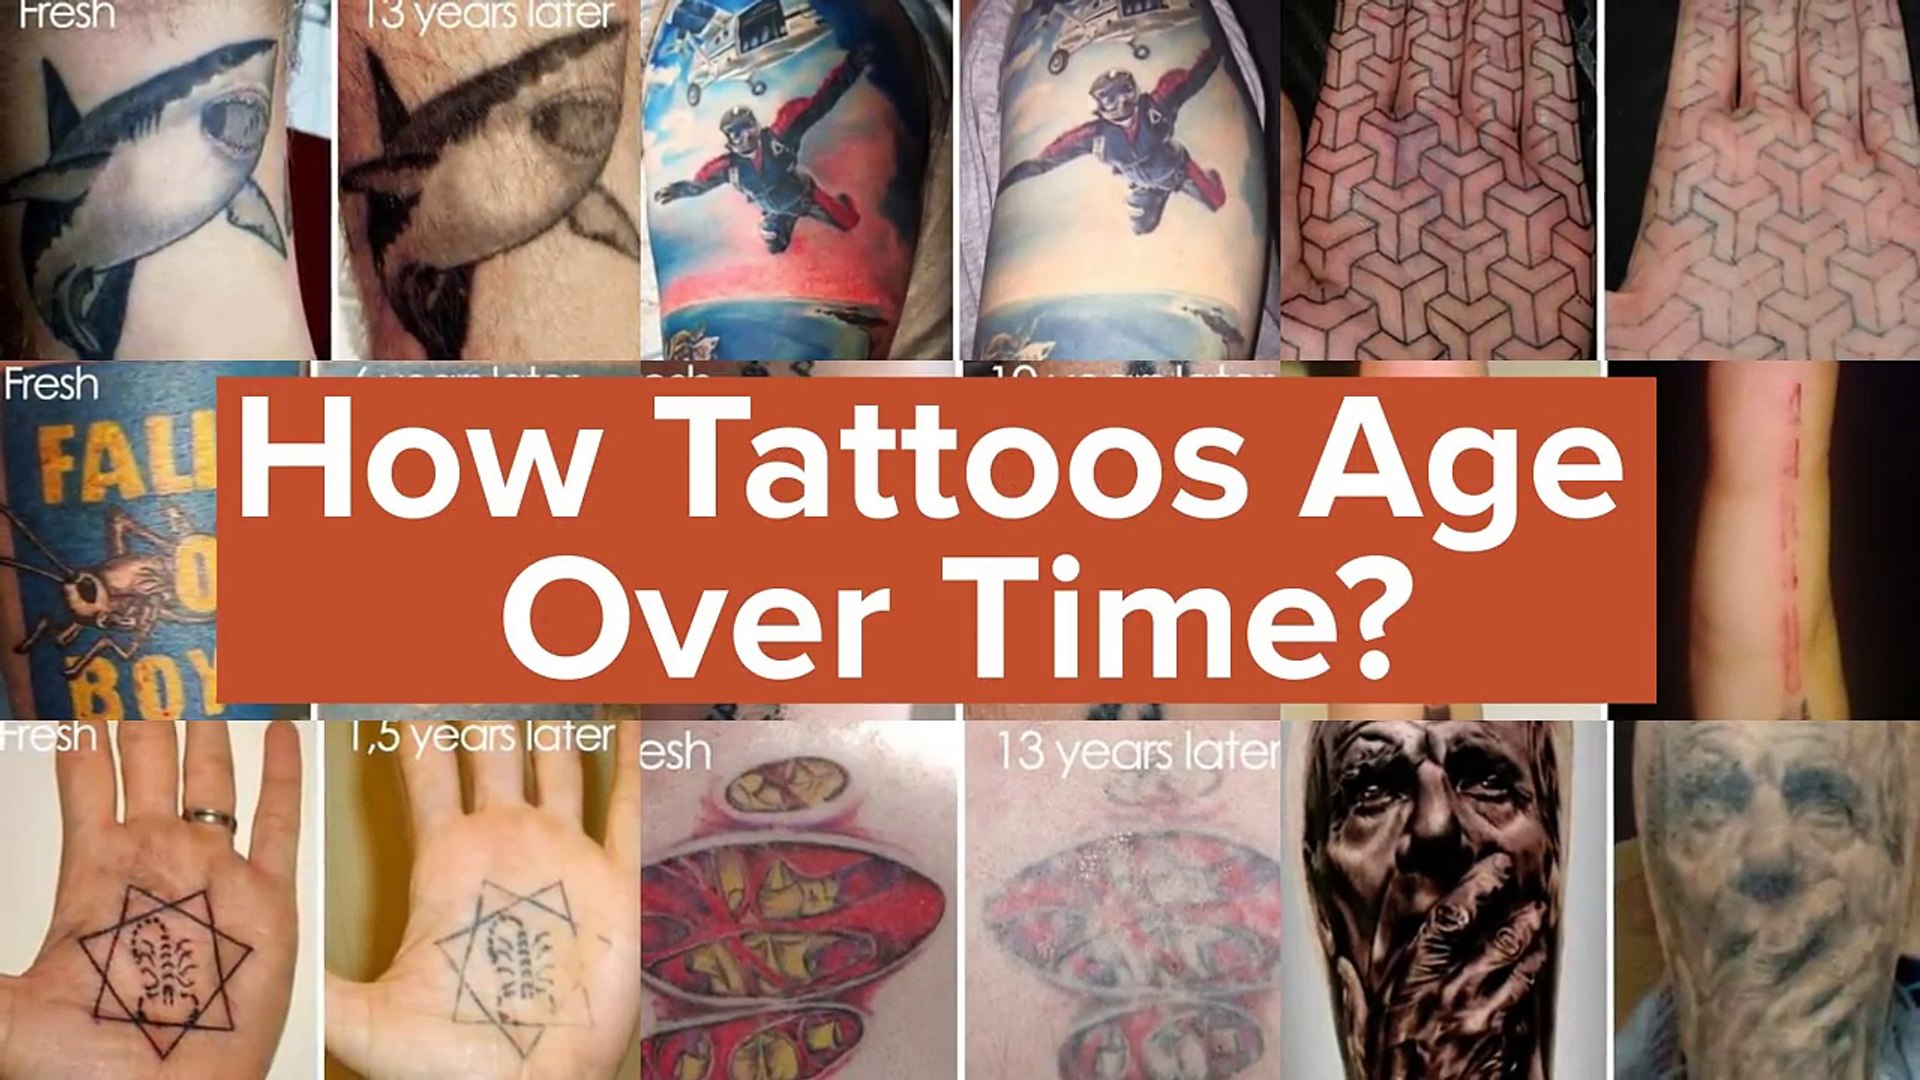 How Tattoos Age Over Time - reasons and advices-vRuIaqXXmeM